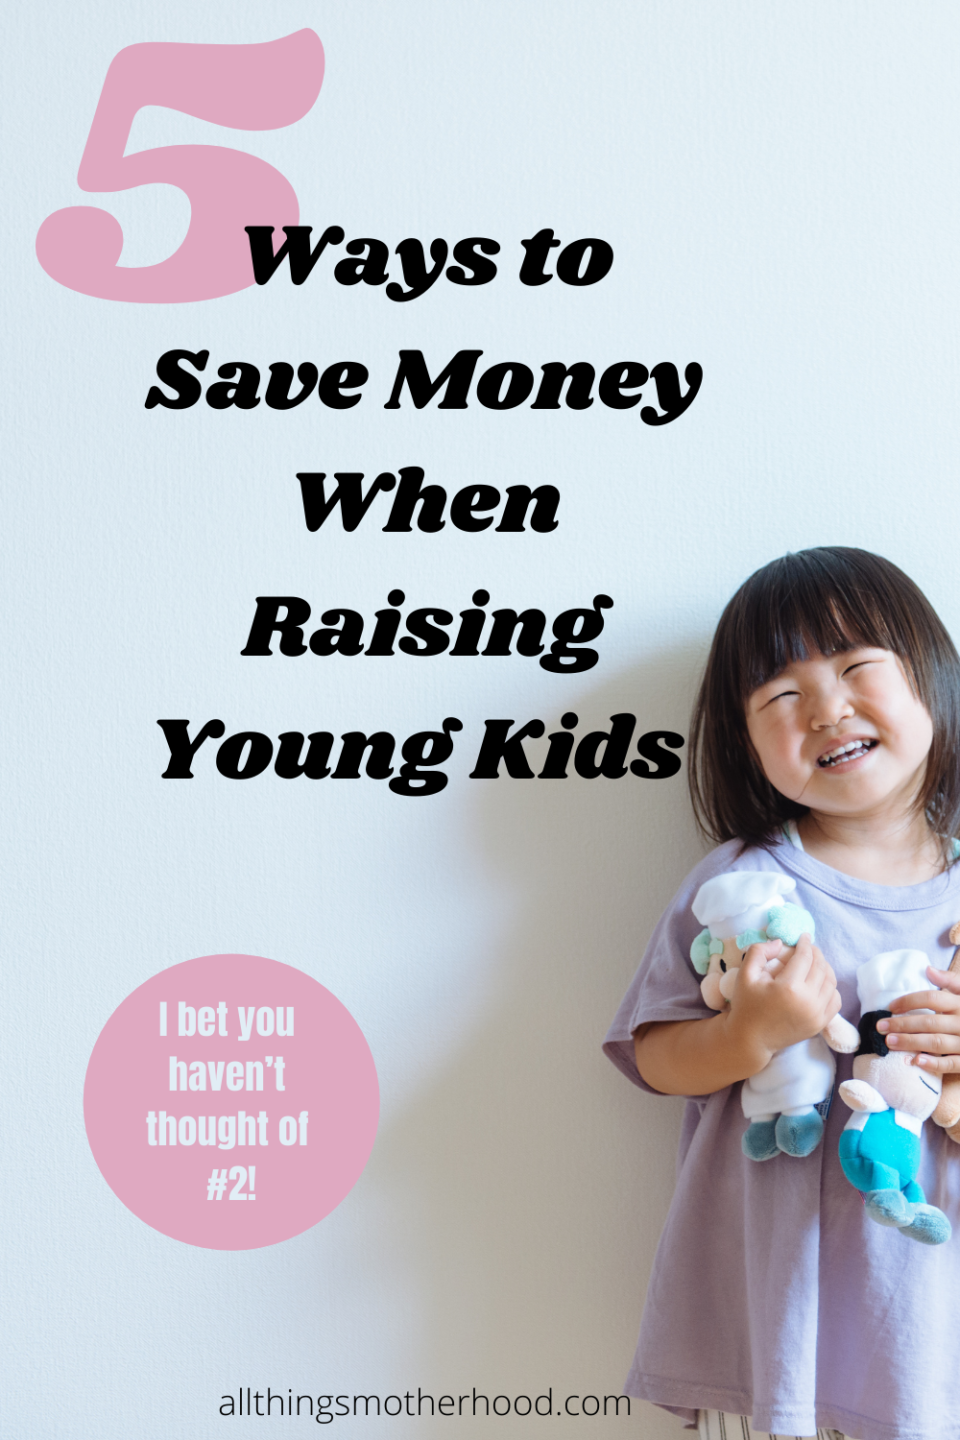 5 Ways to Save Money When Raising Young Kids